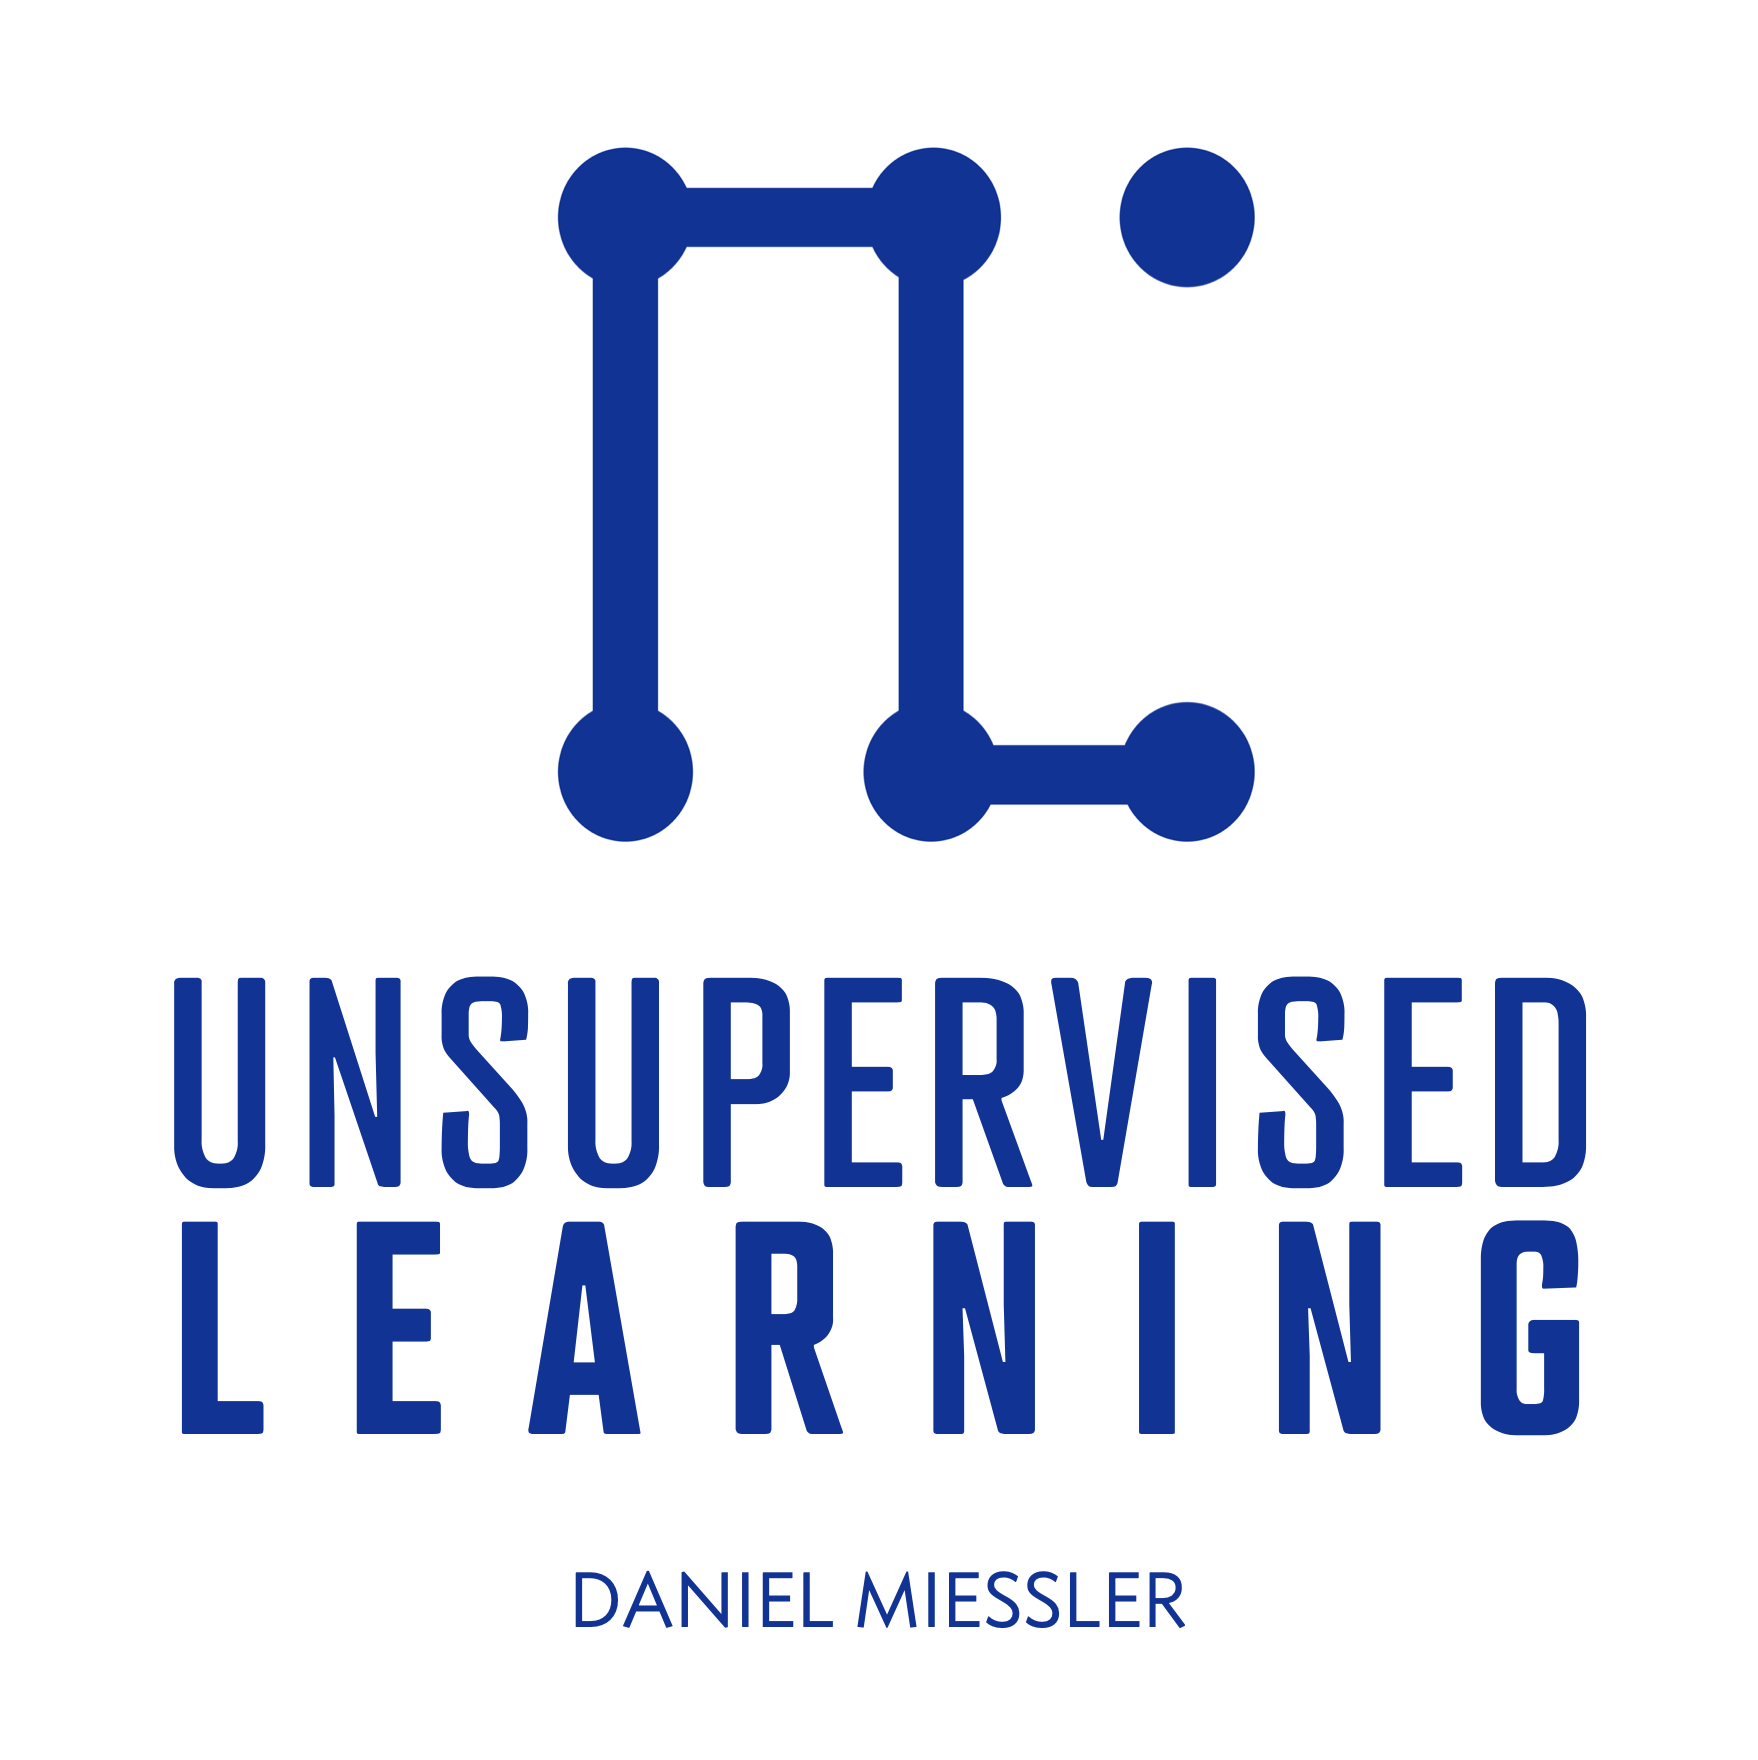 Unsupervised Learning: No. 200